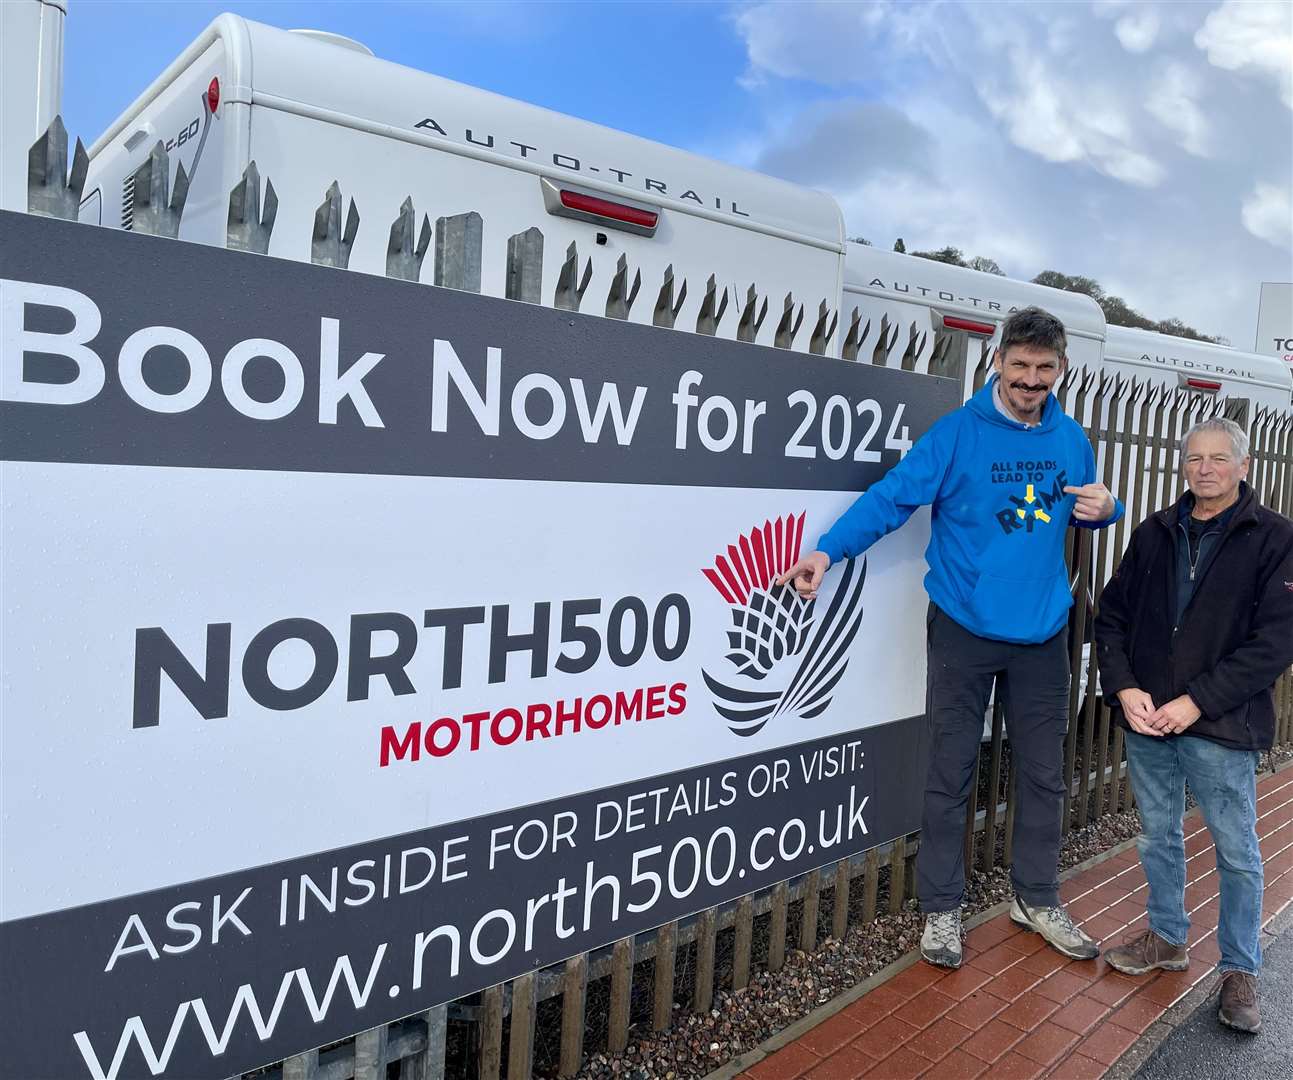 Scottish rugby great Rob Wainwright with North500 Motorhomes operations director Colin Harrison.